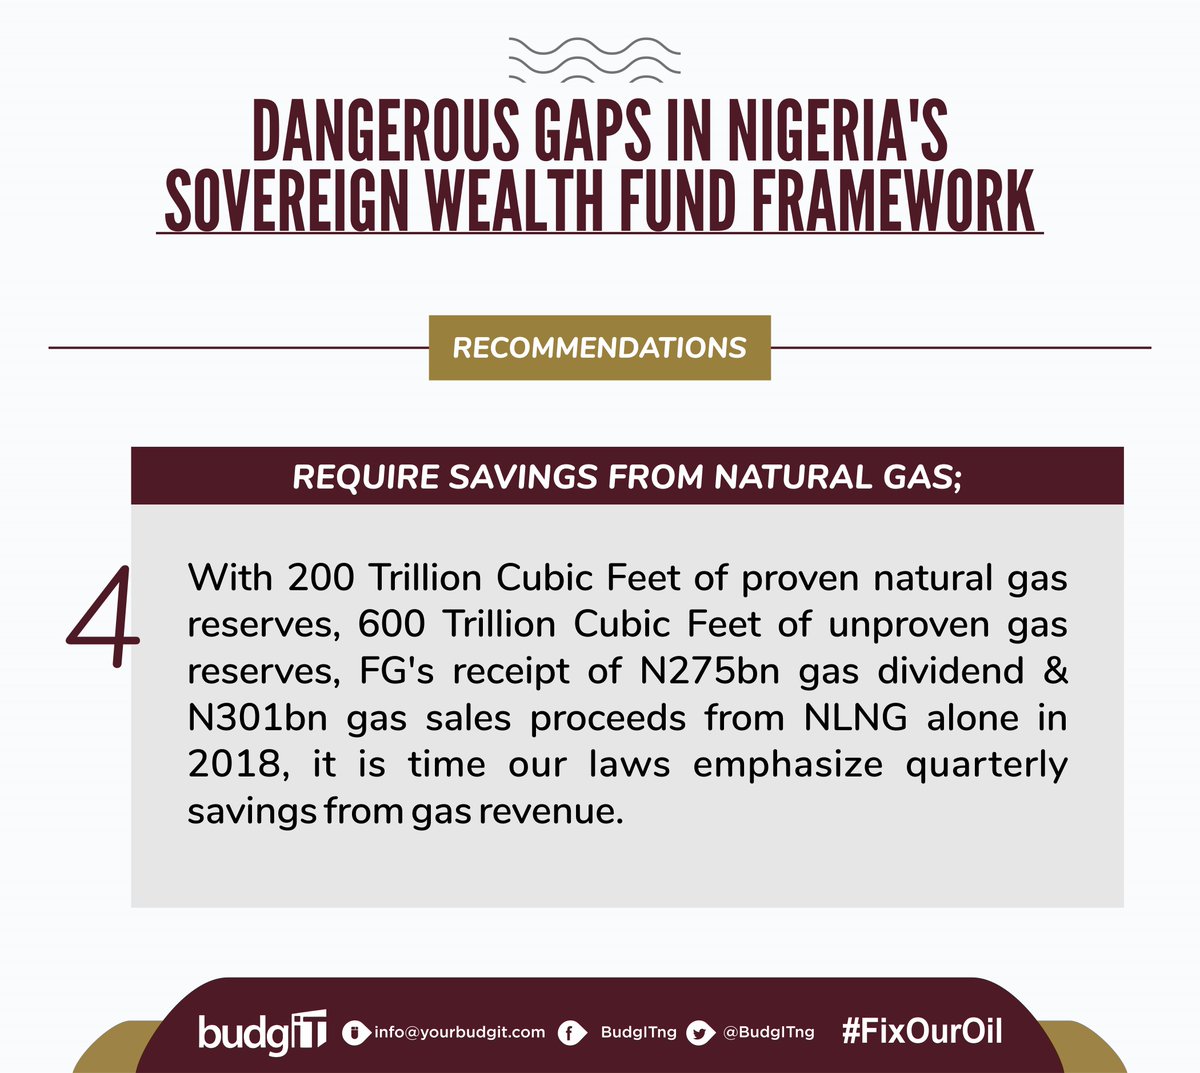 4. Require savings from natural gas; With the country's huge natural gas reserves and the FG's receipt of N275bn dividend & N301bn sales proceeds from NLNG alone in 2018, it's time our laws prioritize quarterly savings from revenue accrued from natural gas sales #FixOurOil